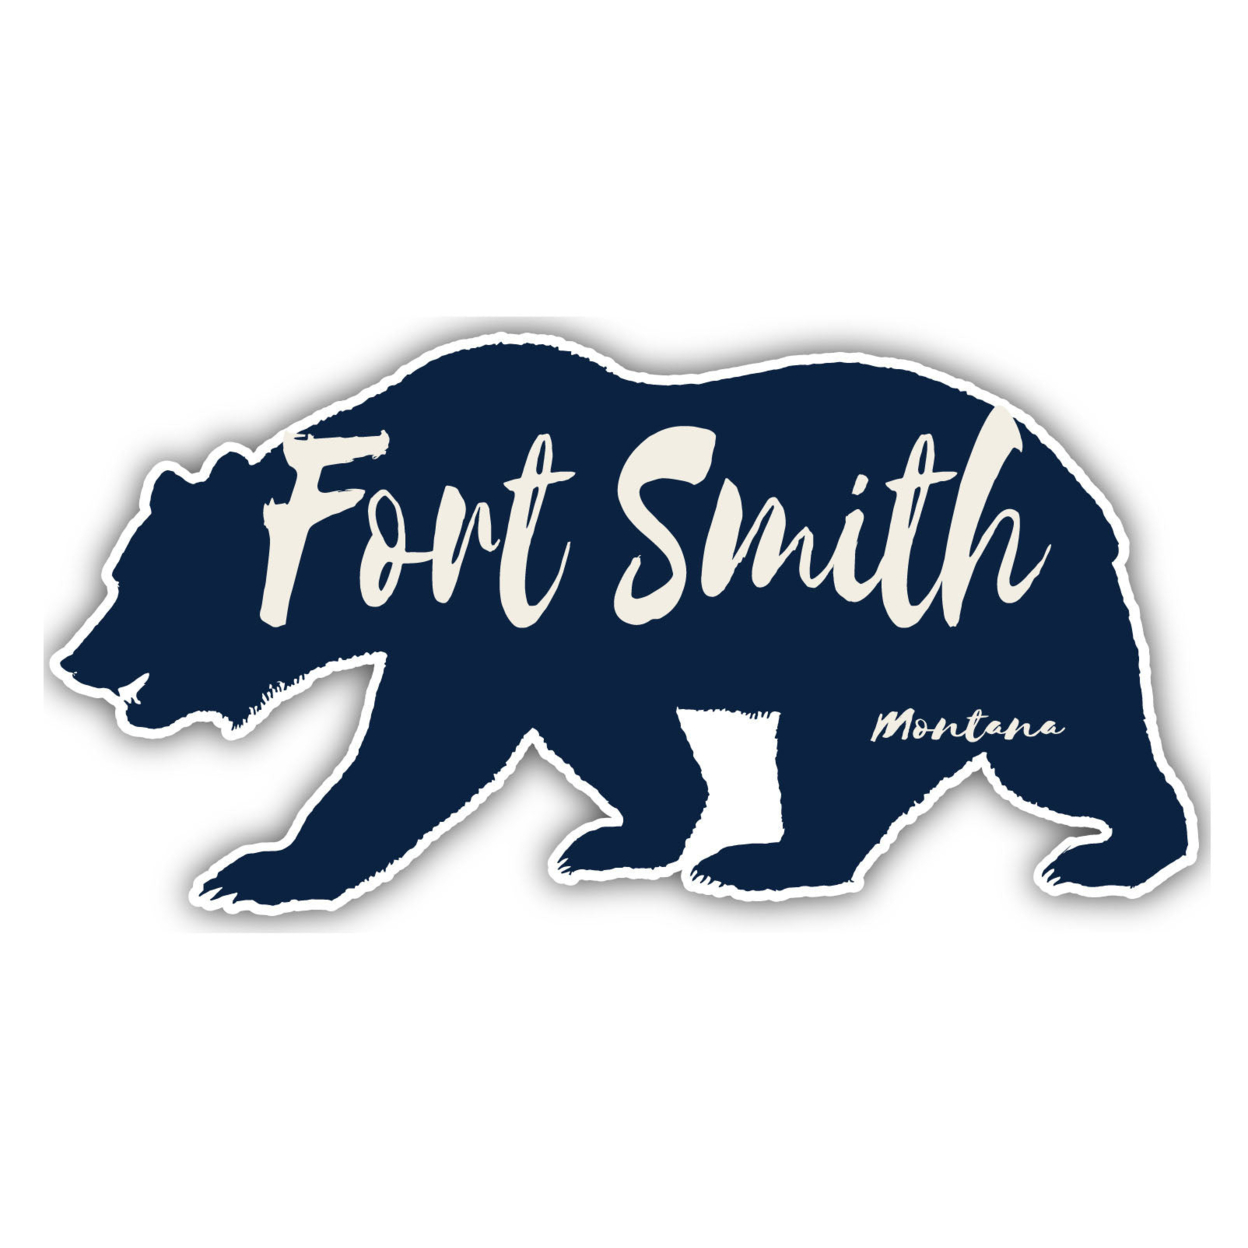 Fort Smith Montana Souvenir Decorative Stickers (Choose Theme And Size) - Single Unit, 8-Inch, Tent